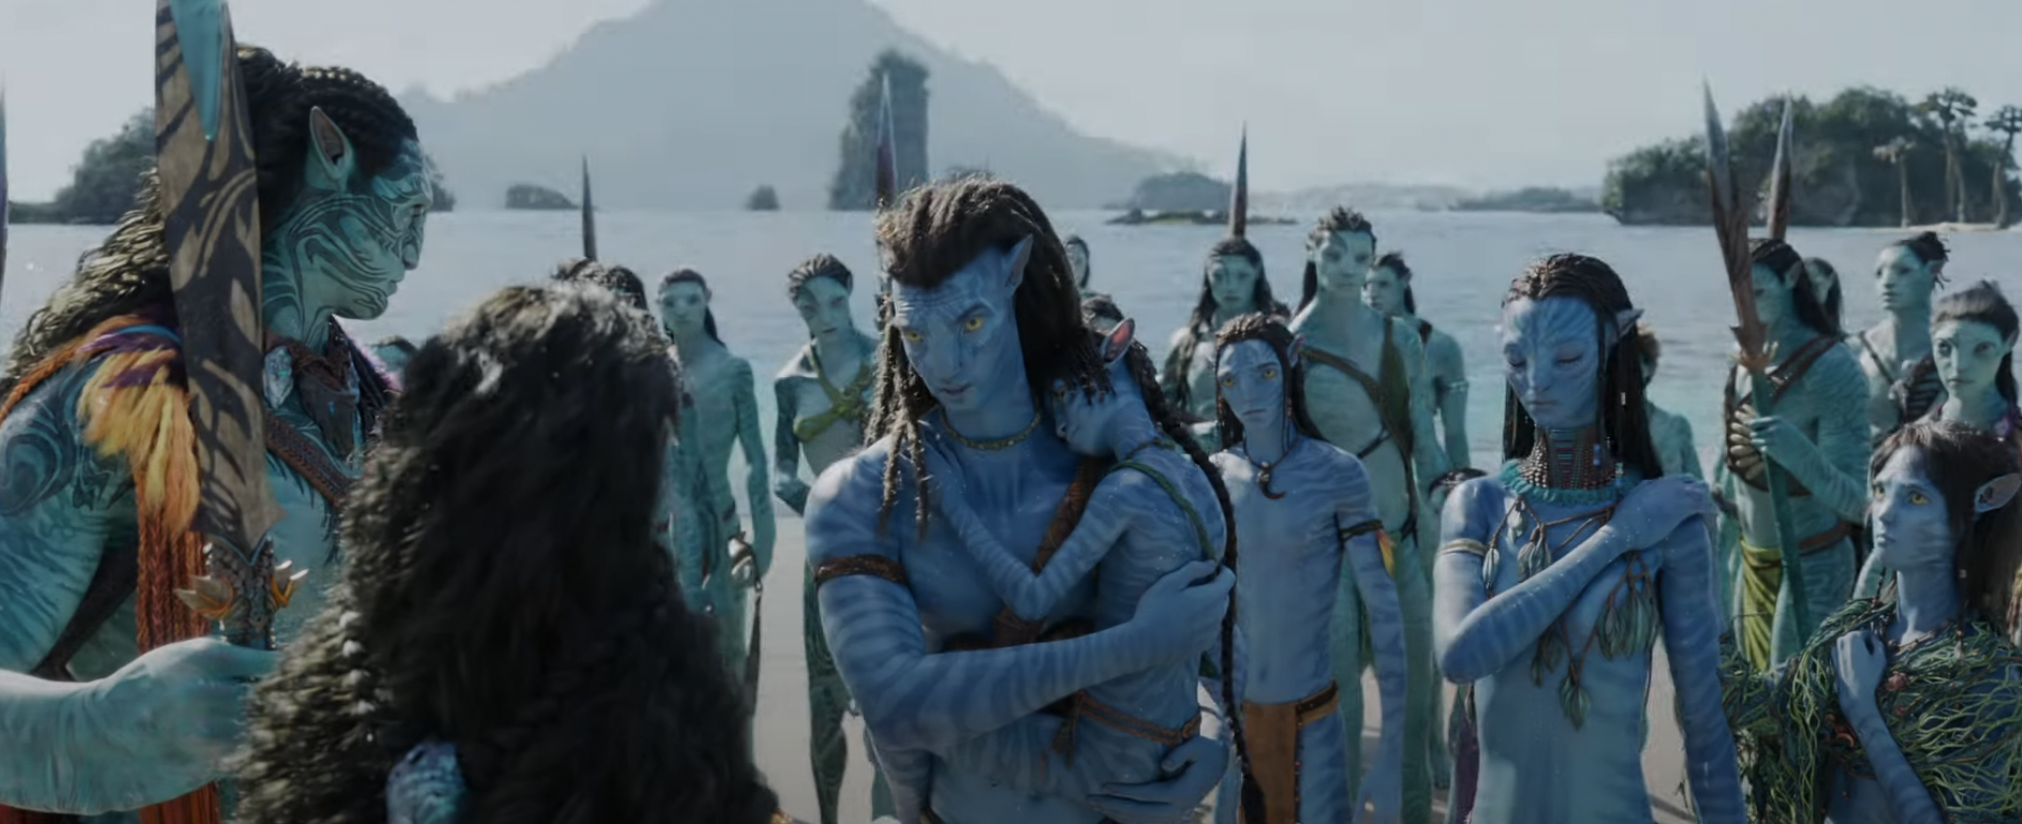 Final Trailer For ‘Avatar: The Way Of Water’ Released, Tix On Sale Now